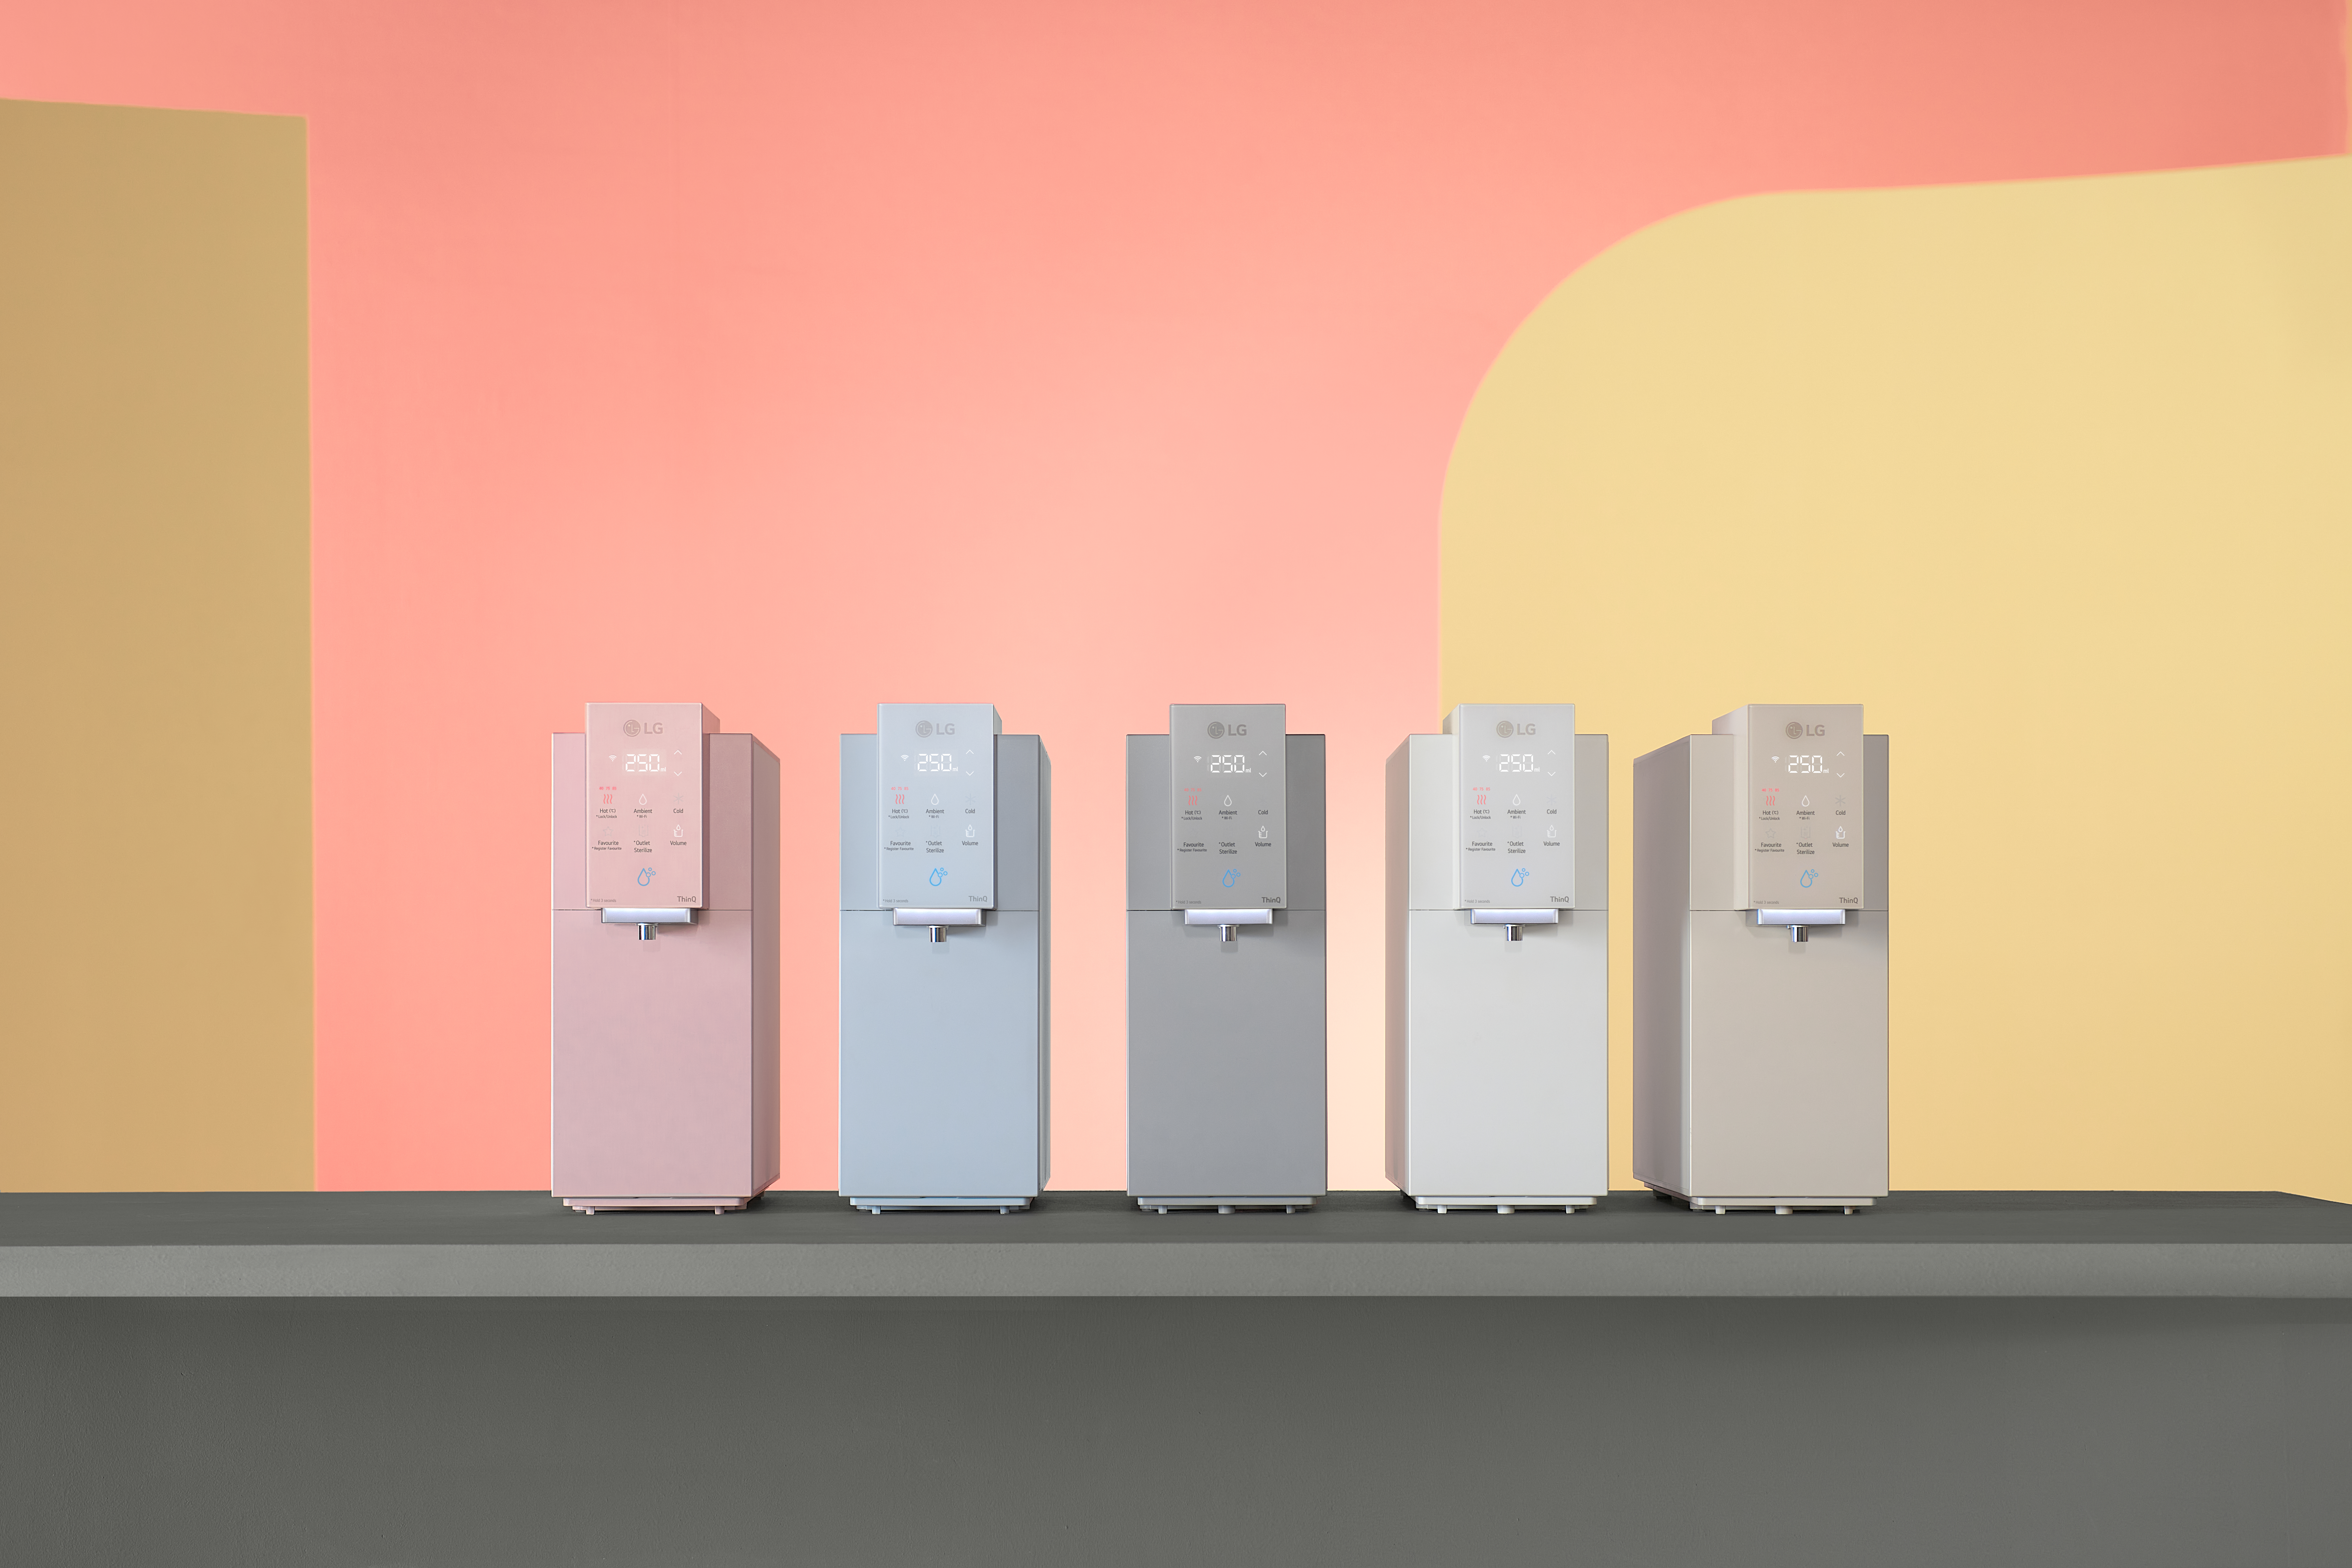 Malaysia can now colour their home and life with lg's latest self-service tankless water purifier